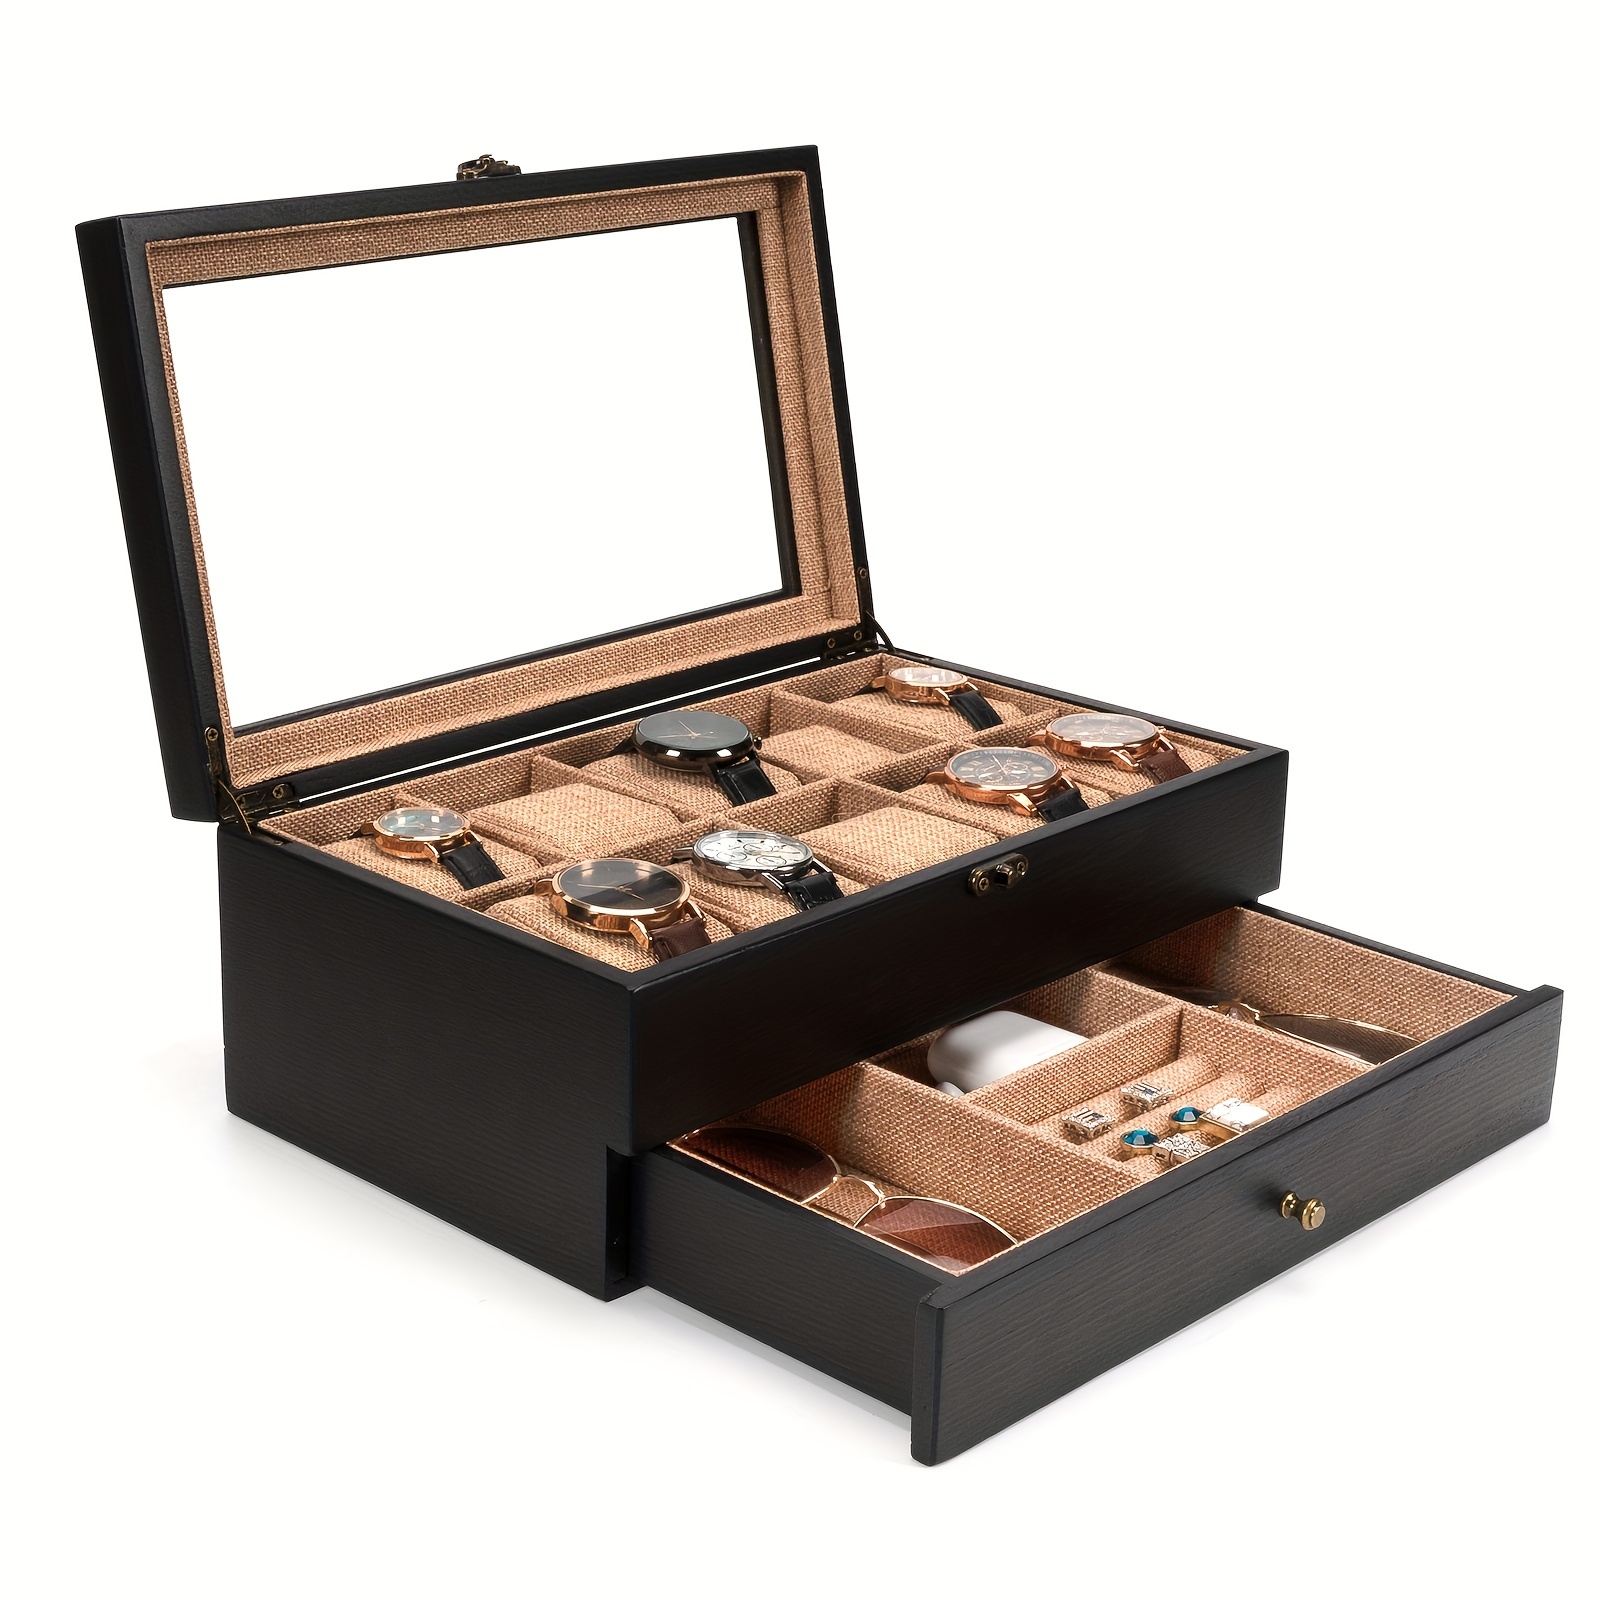 10 Slots Wooden Watch Box | Perfect Men's & Women's Gift | Free Shipping on First Order | Our Store